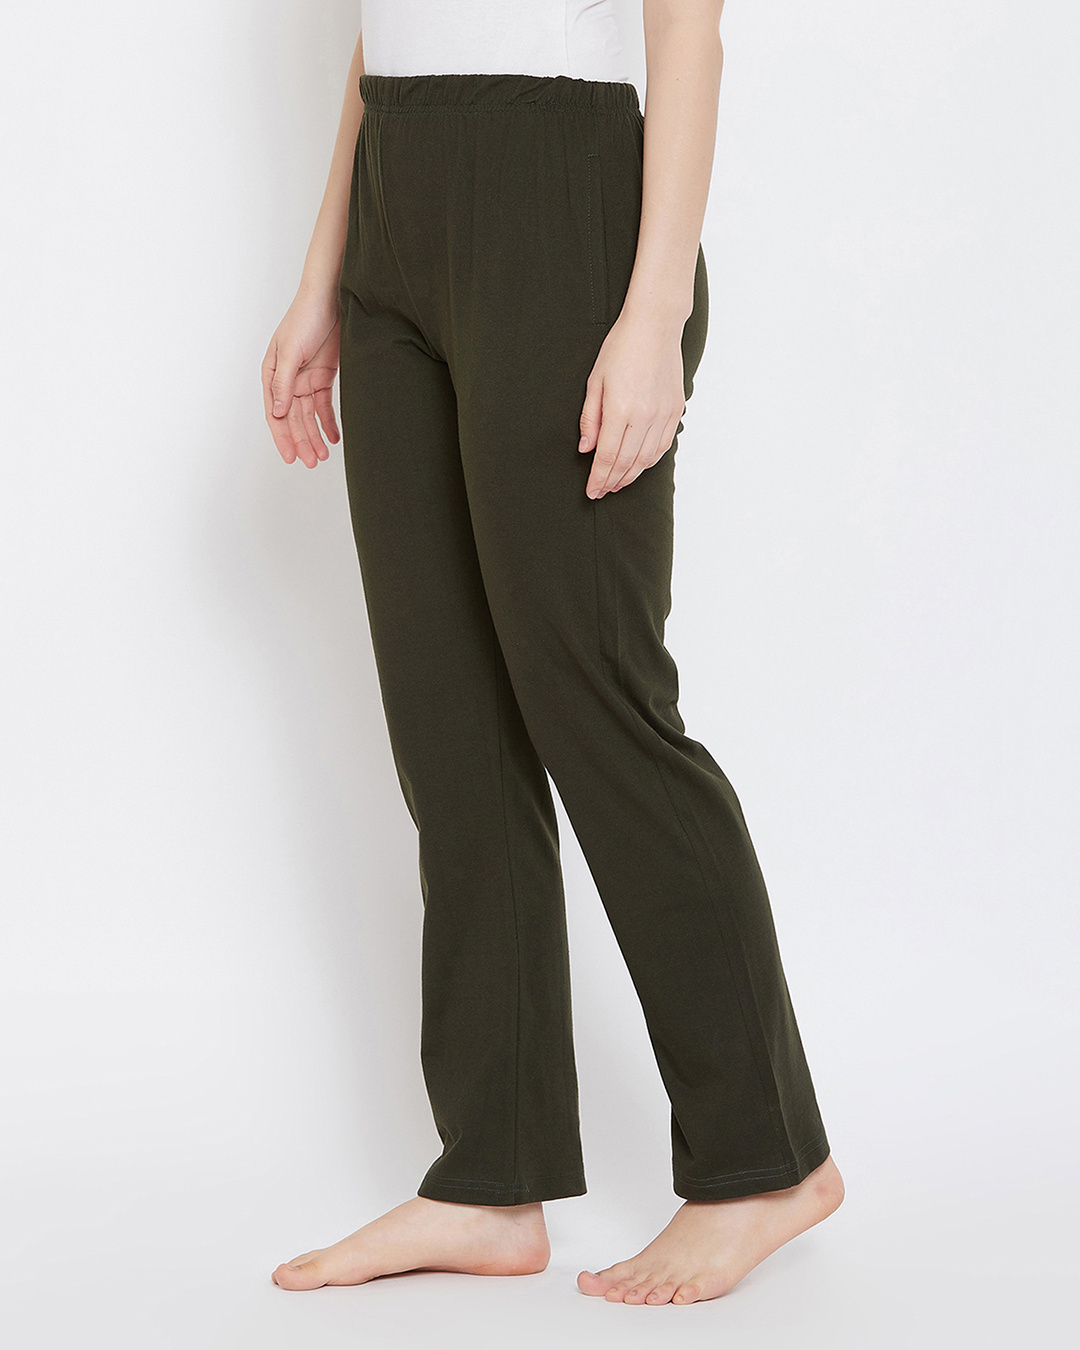 Shop Chic Basic Pyjamas In Olive Green  Cotton Rich-Back